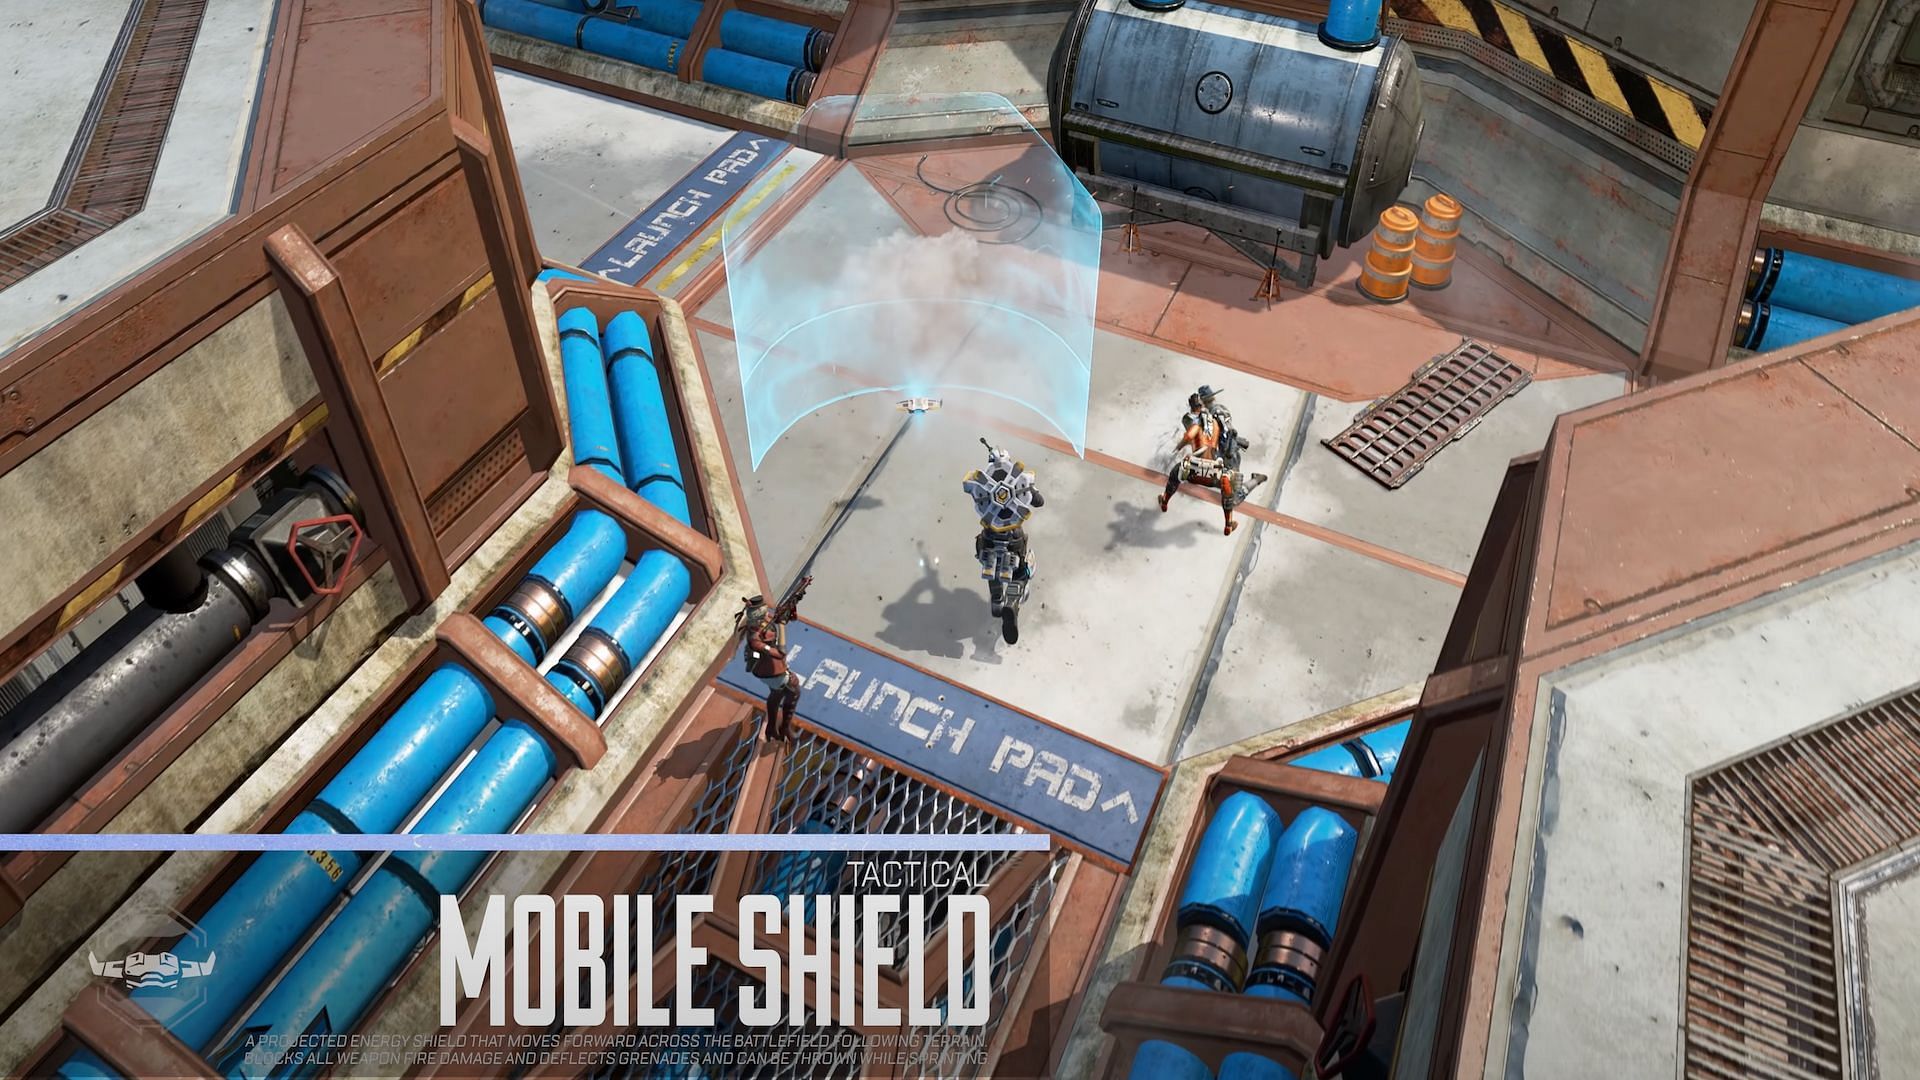 Apex Legends players can use their mobile shield to move between cover (Image via Respawn Entertainment)